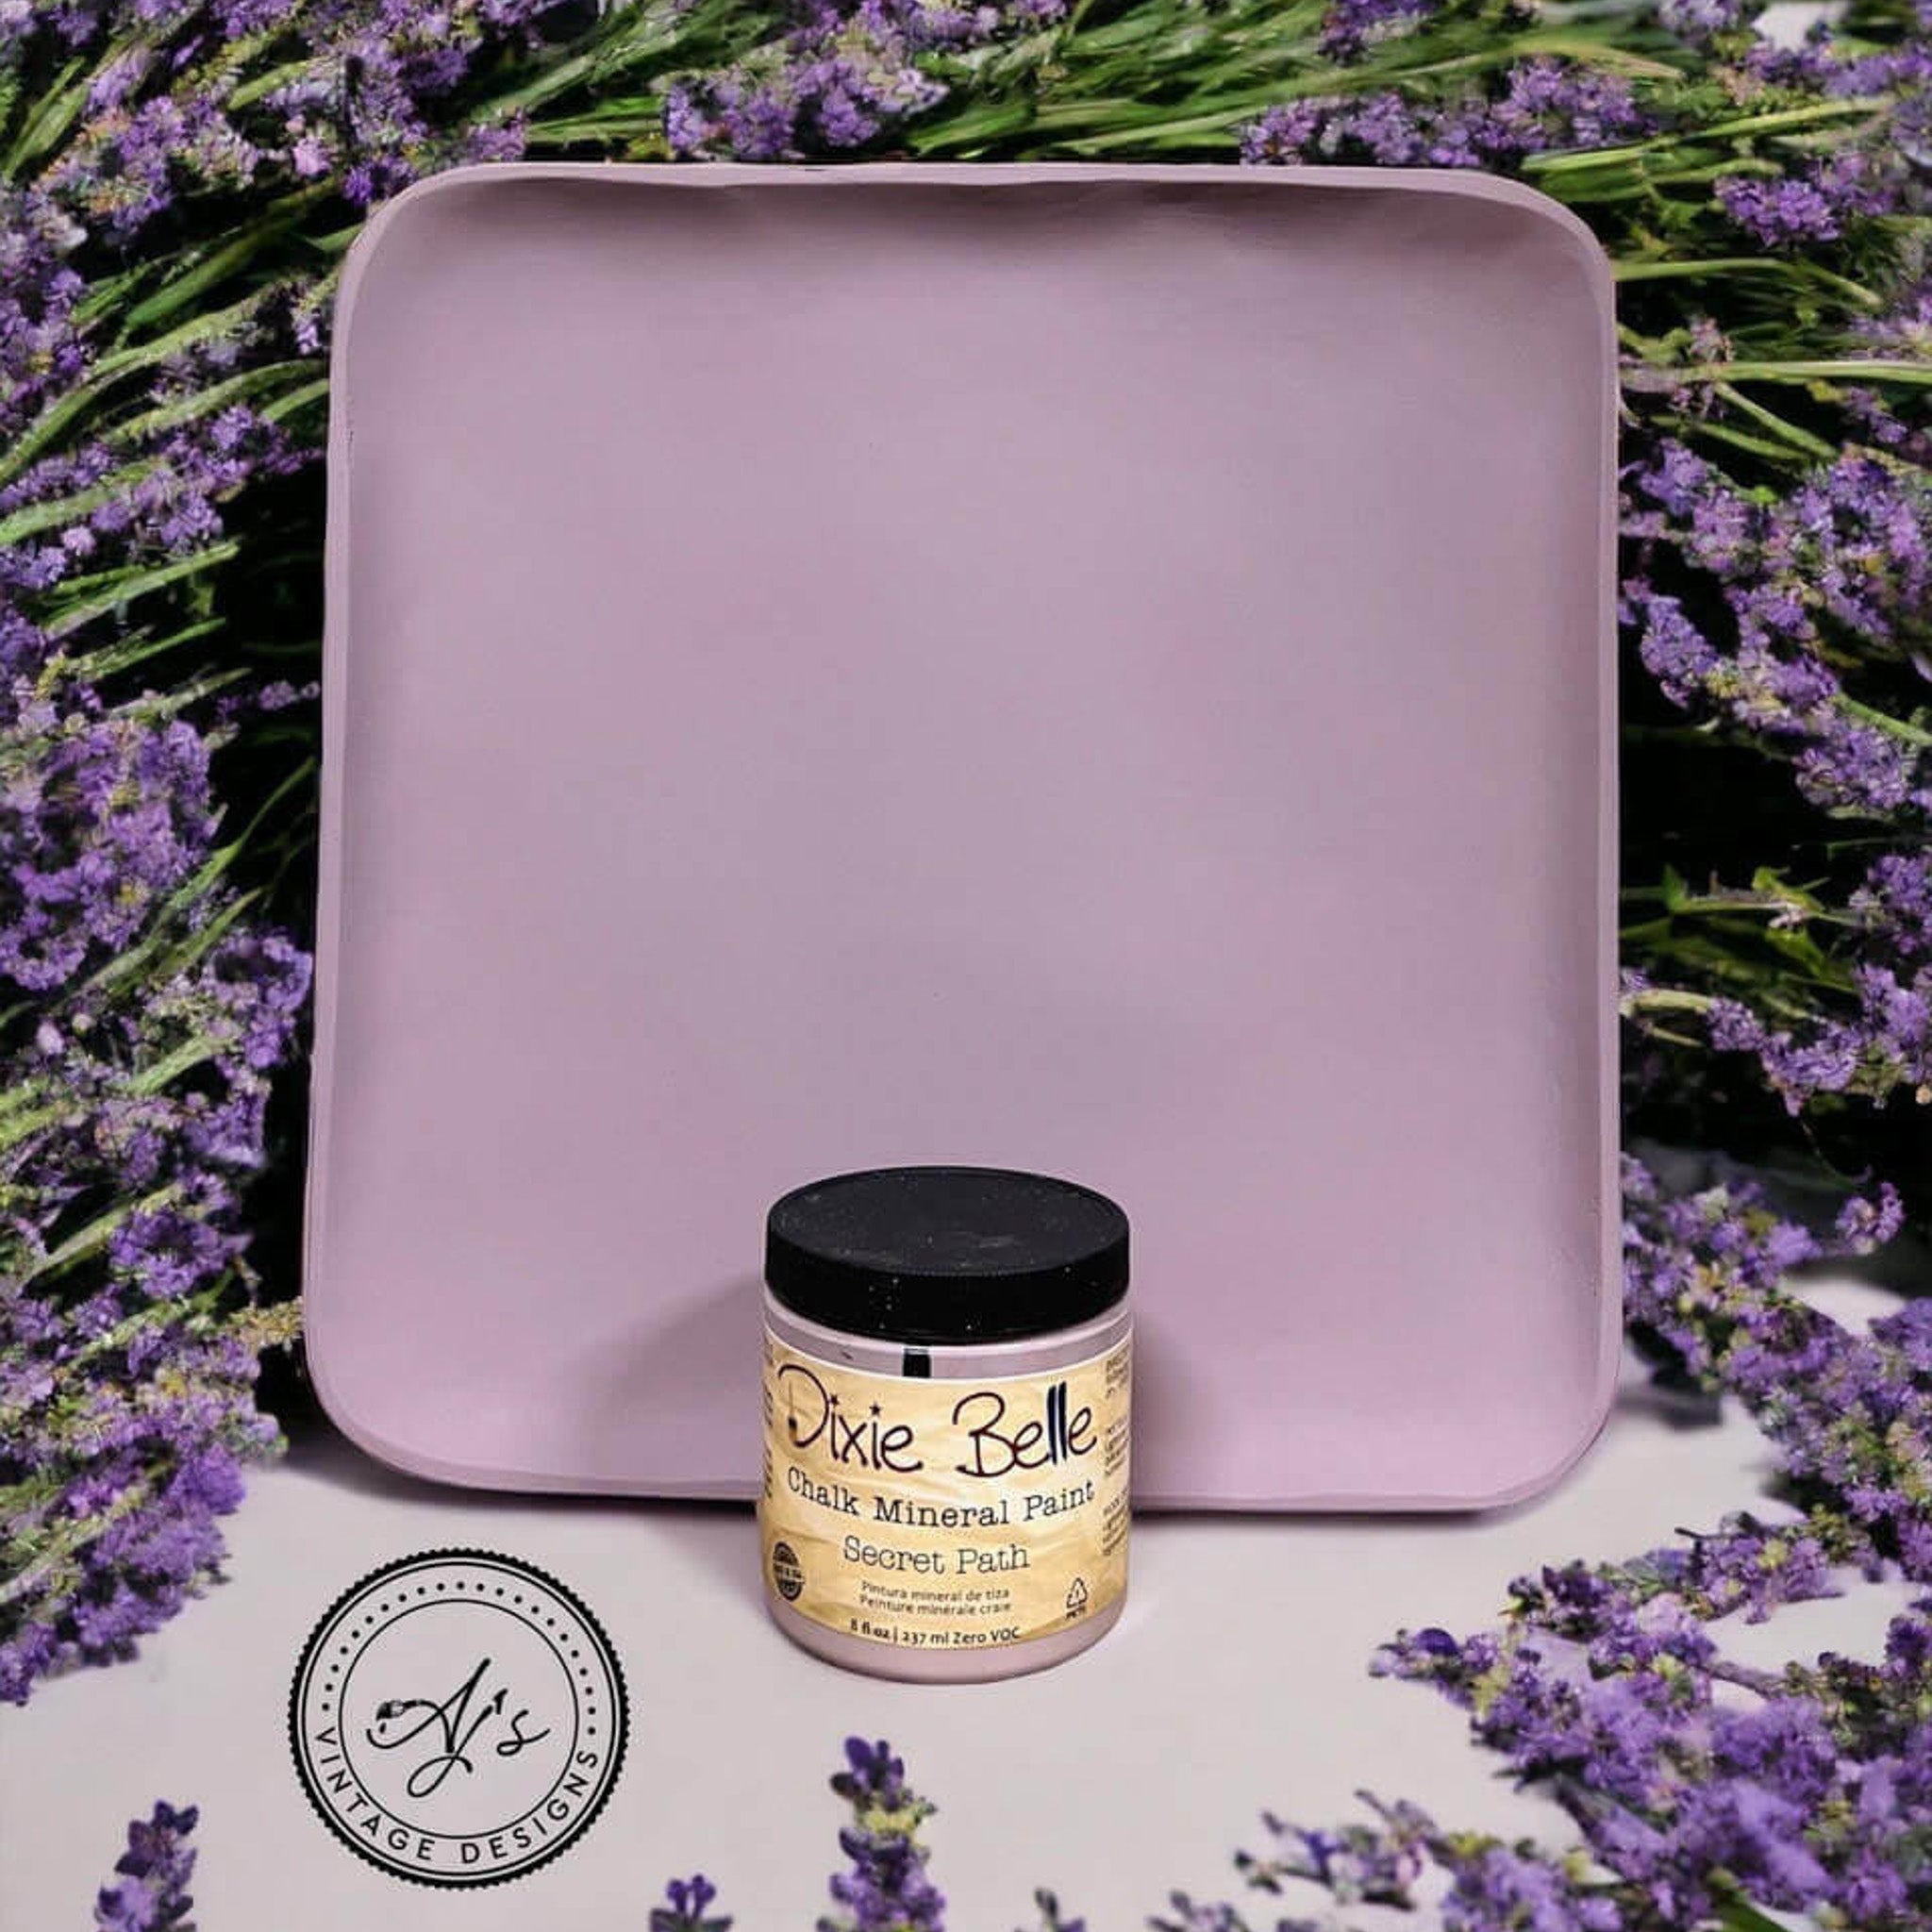 A square wood tray refurbished by Aj's Vintage Design is painted in Dixie Belle's Secret Path chalk mineral paint. The tray is surrounded by lavender flowers and the container of paint sits in front of the tray.